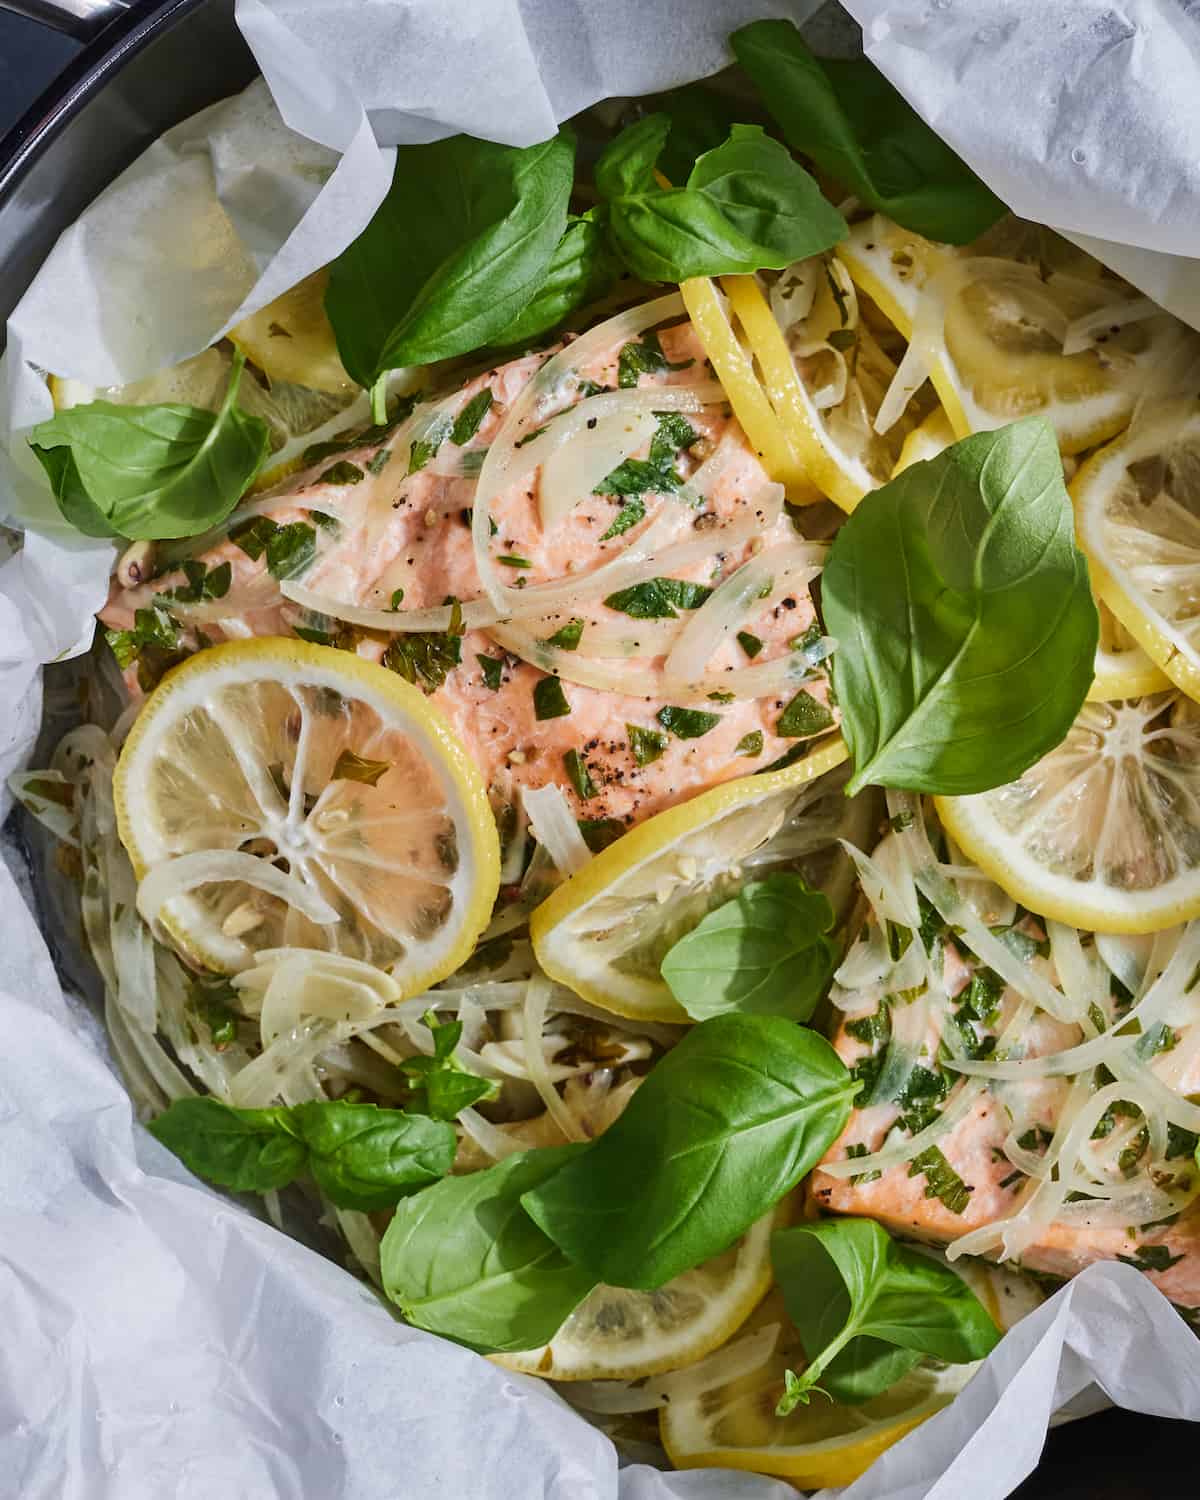 A close-up shot of a skillet lined with parchment paper, with a salmon placed inside, topped with thinly sliced lemon slices, onion slices and lots of herbs and basil leaves.